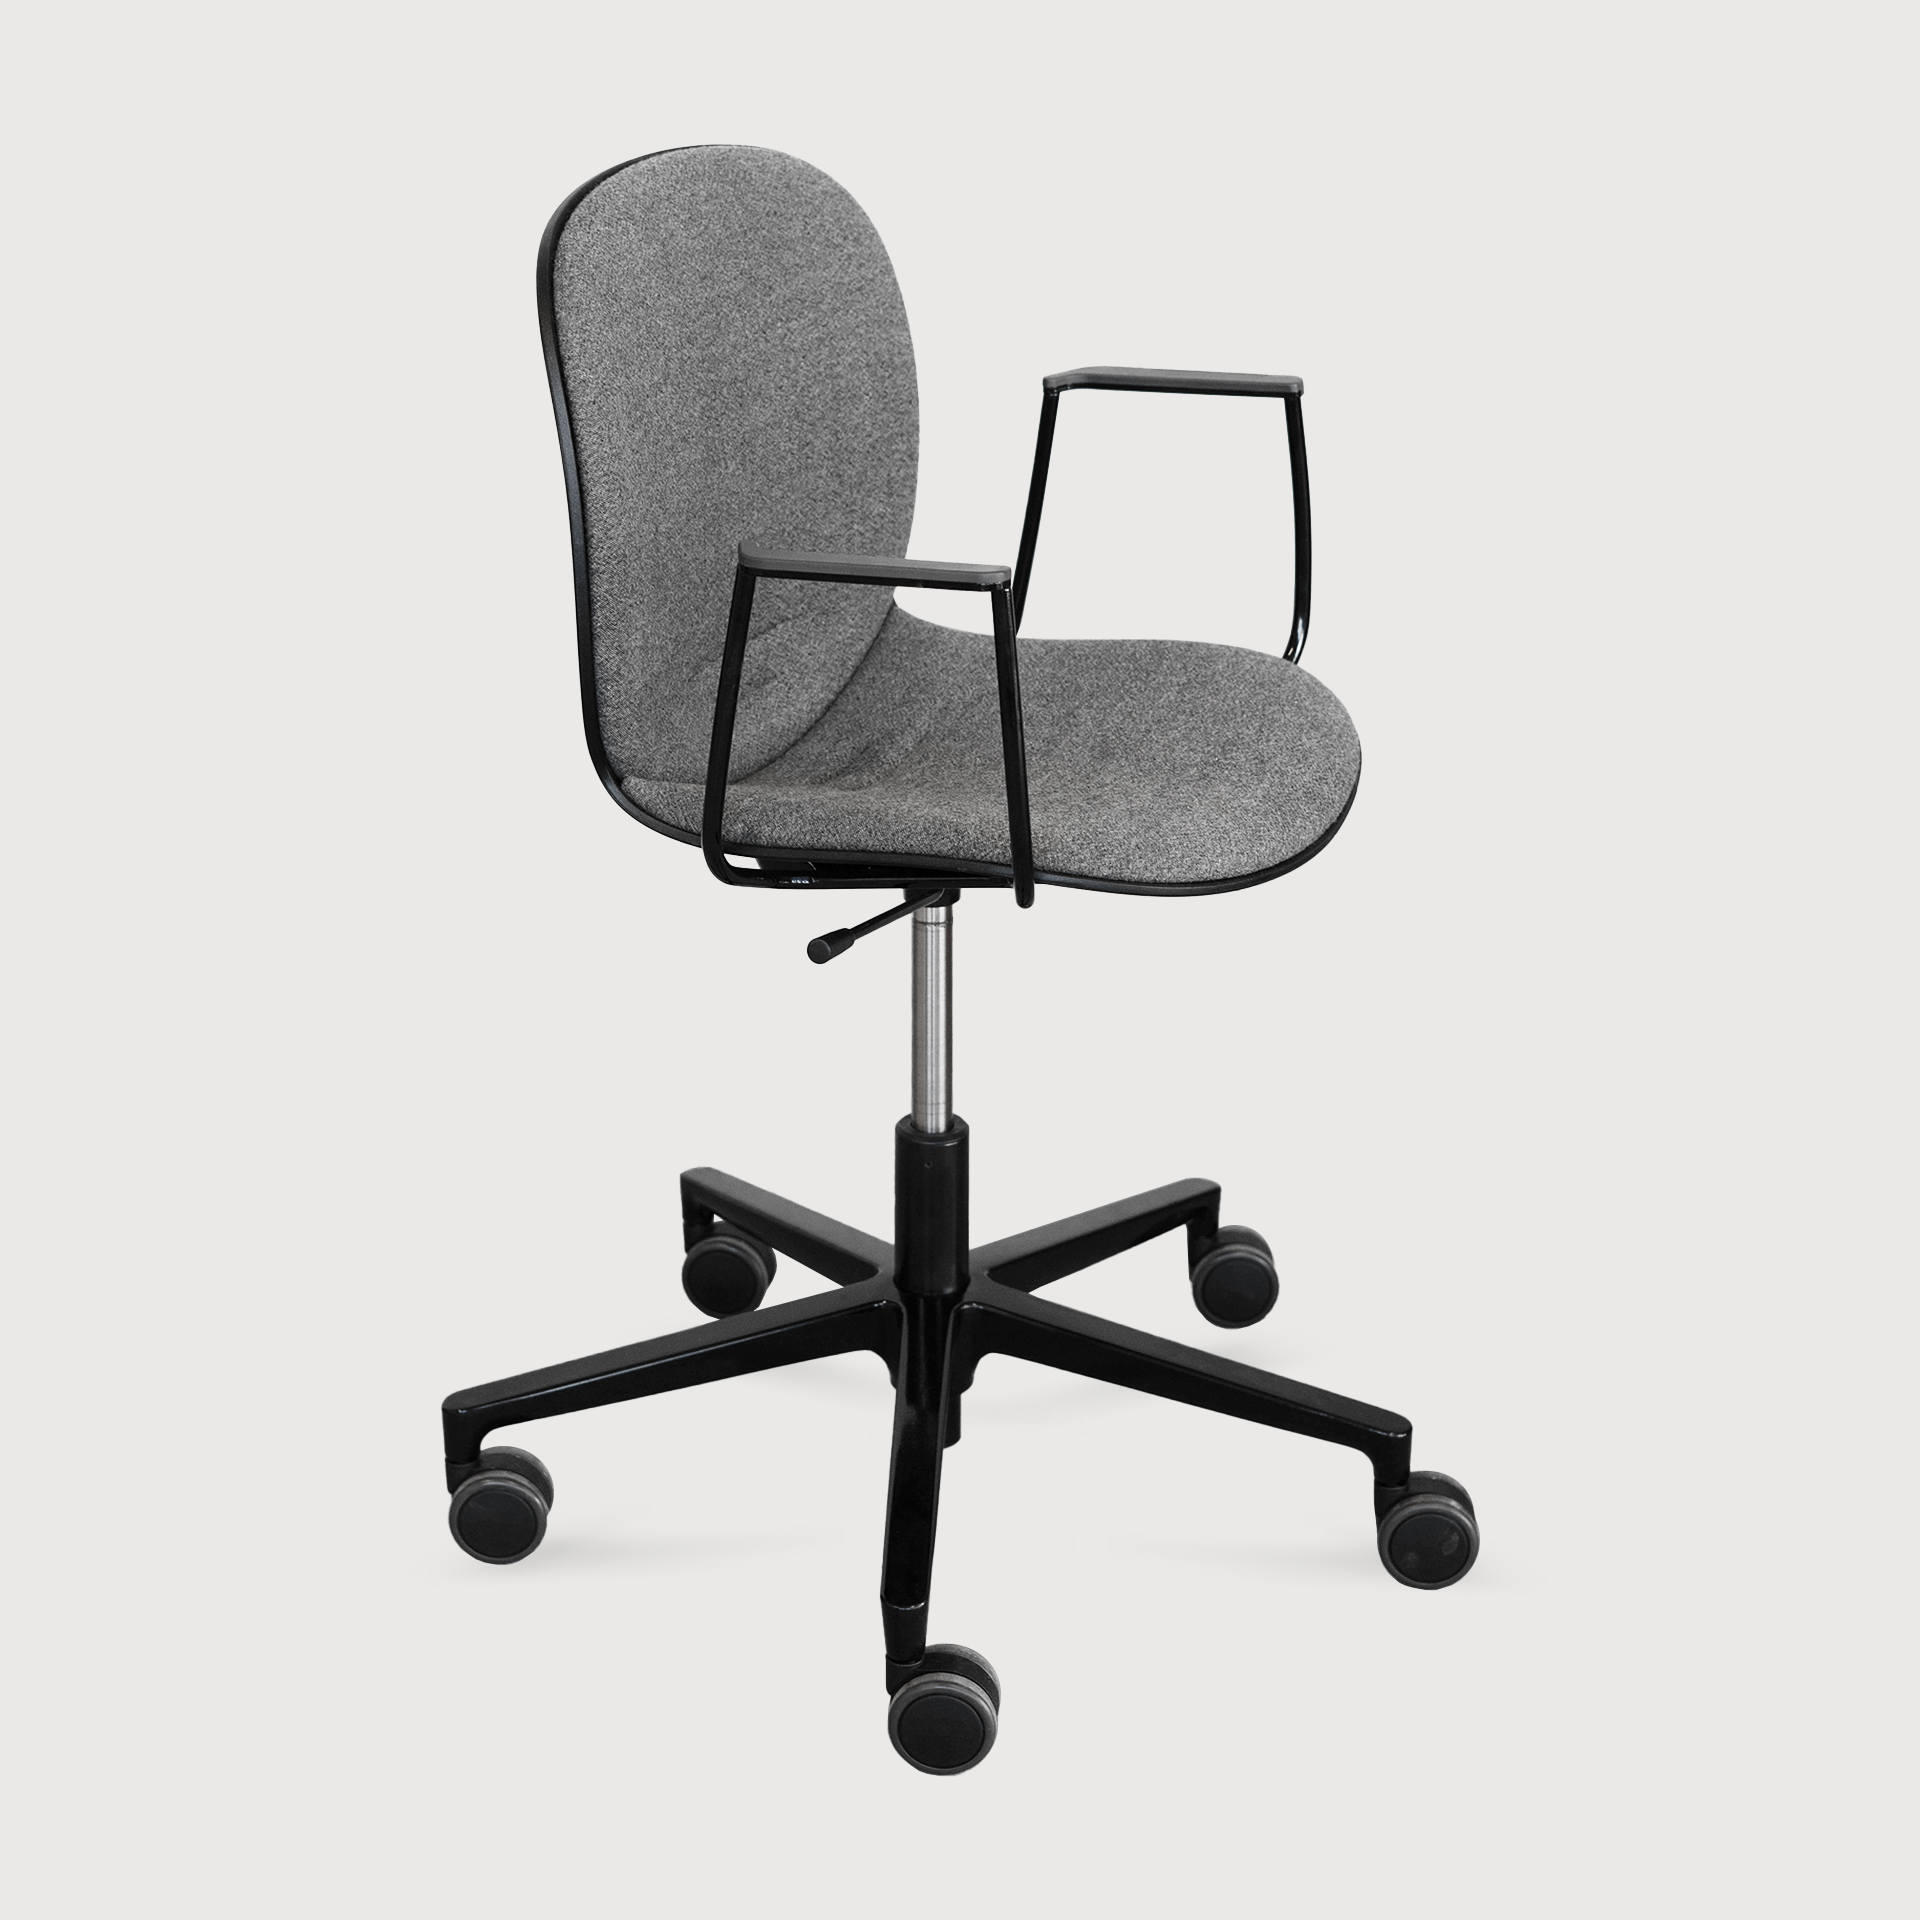 [L6071] Office chair 6070 SB with armrests (Dark grey)